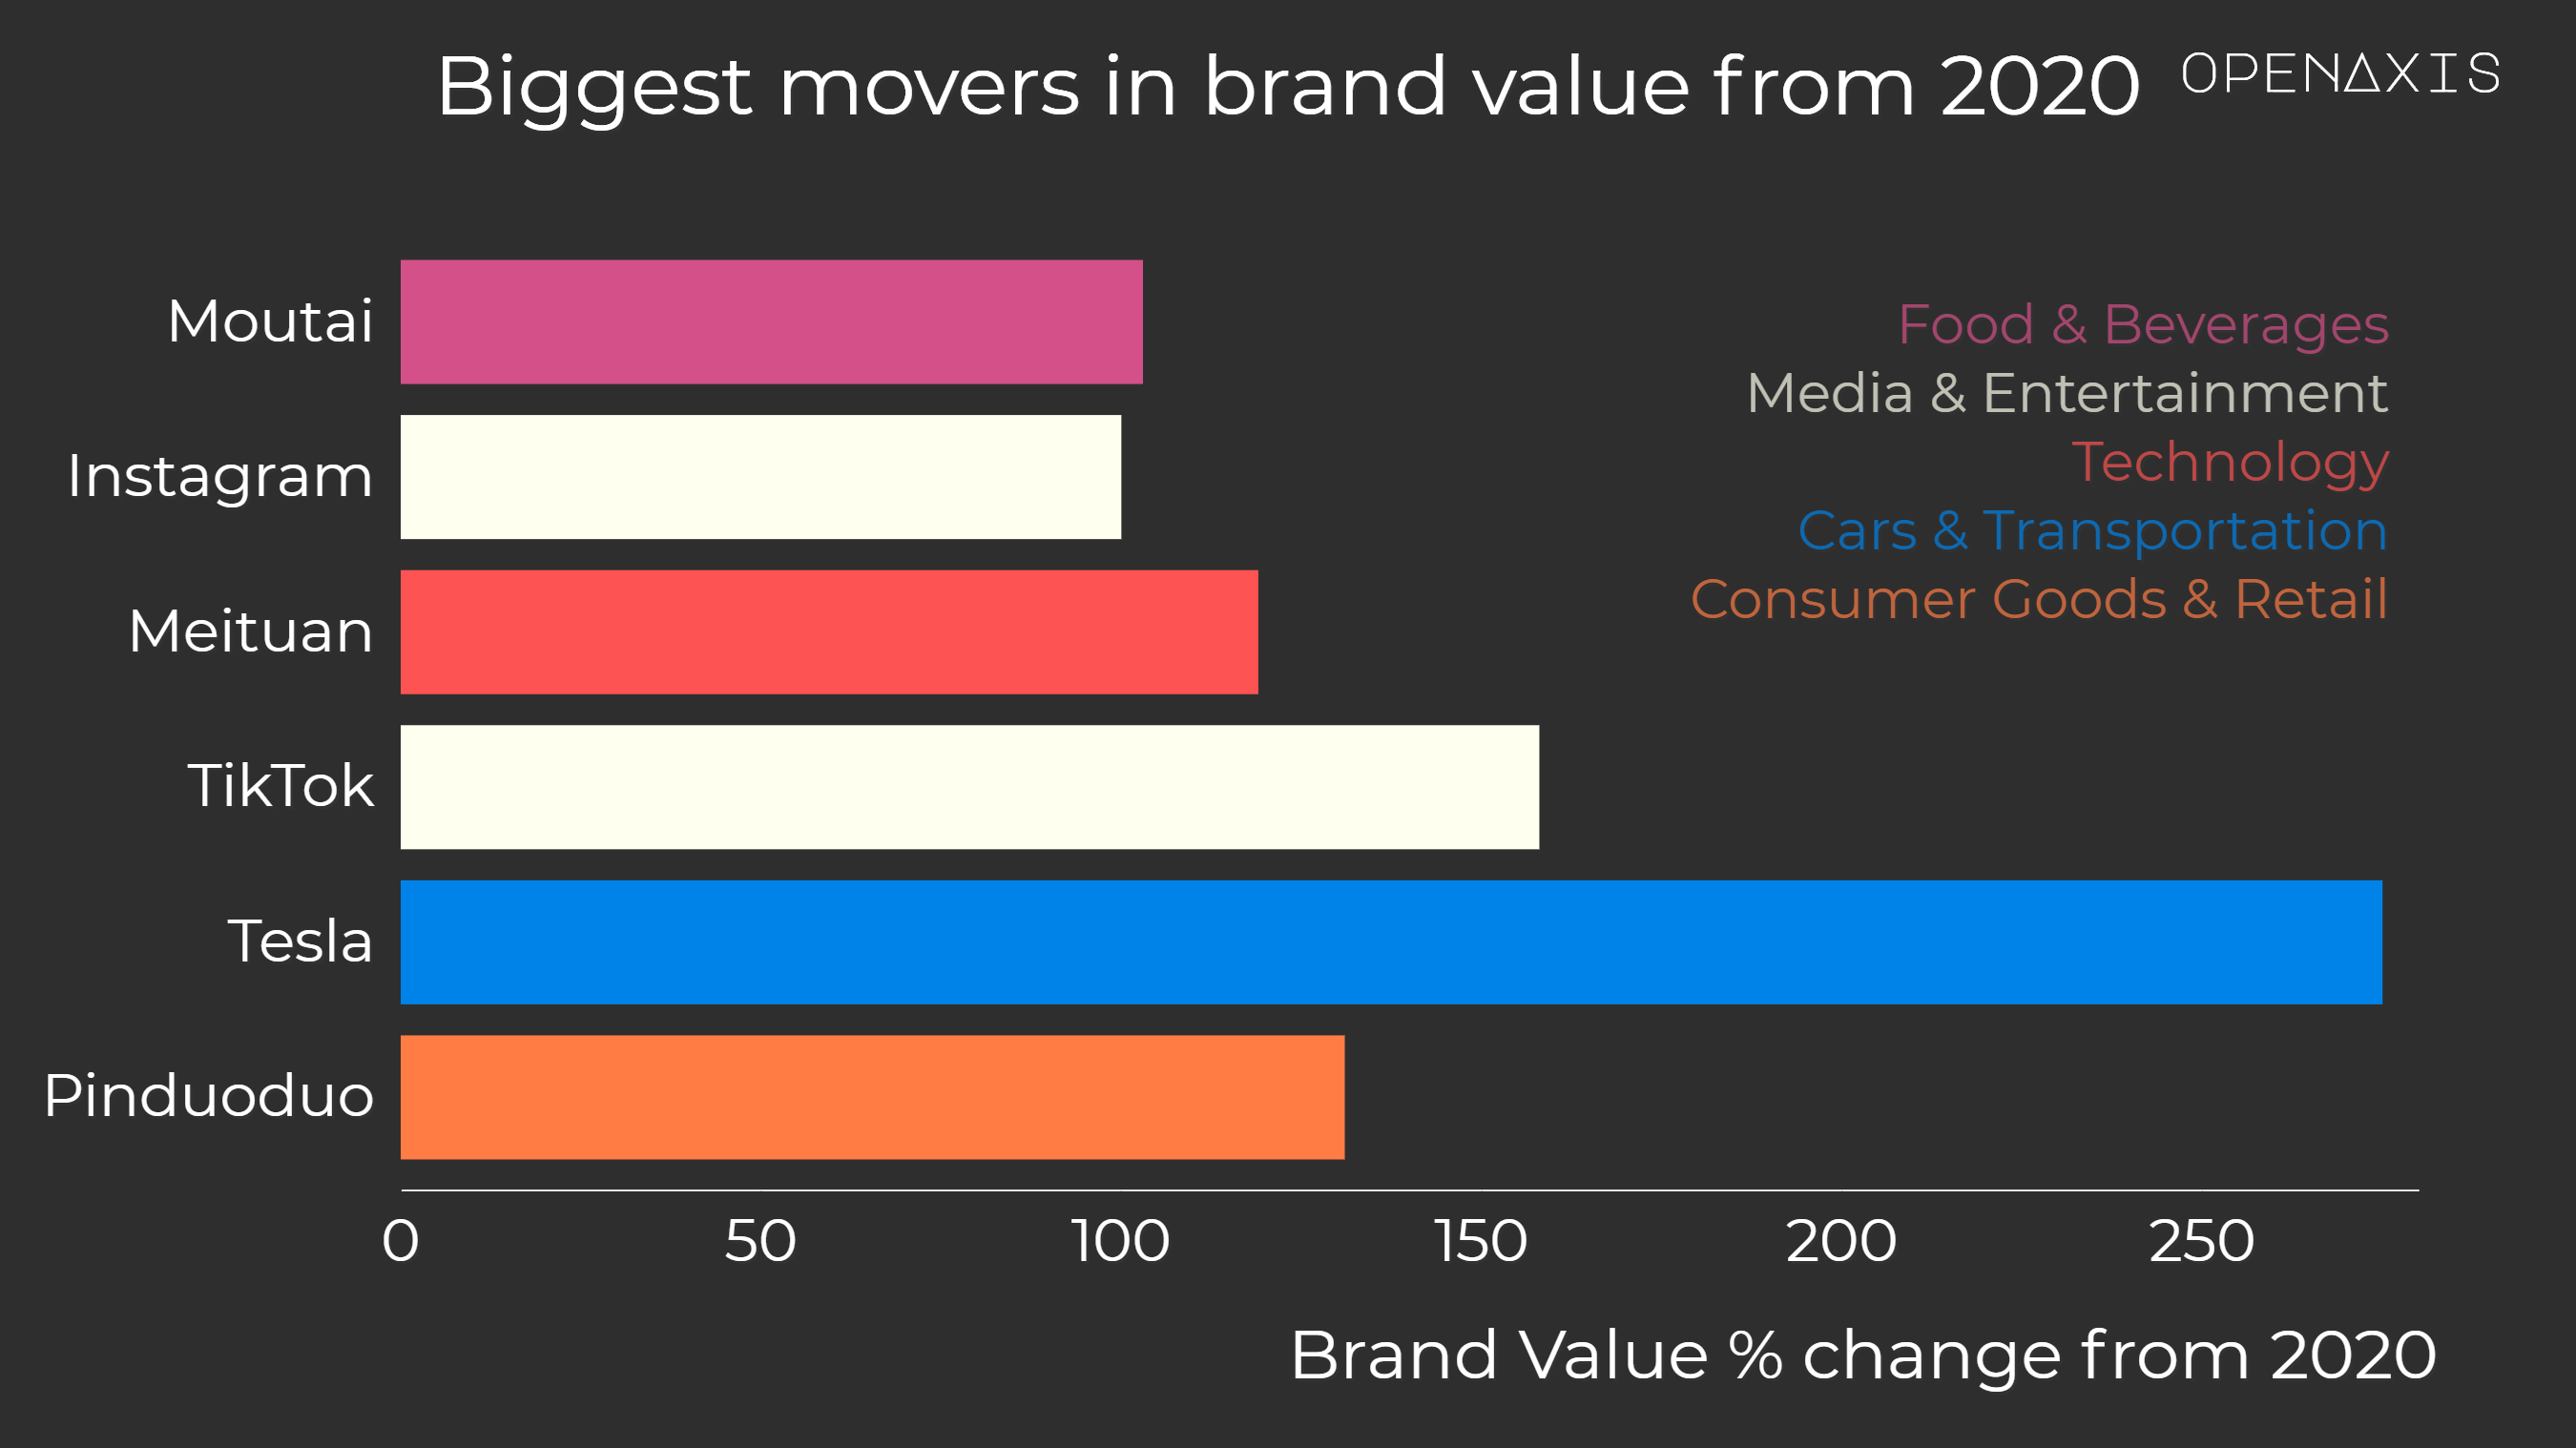 <p>Looks like Tesla shot up the most (+275%) in brand value along with media companies Instagram &amp; TikTok. As you can see in the dataset below or <a href="https://app.openaxis.com/visualizations/3240" target="_blank">this chart of the Top 10 Brands here</a>, Tesla is overall #47 despite it's big move up the rankings. </p><p><br /></p><p>Source: <a href="/data/3730" target="_blank">Kantar BrandZ</a></p><p><br /></p>